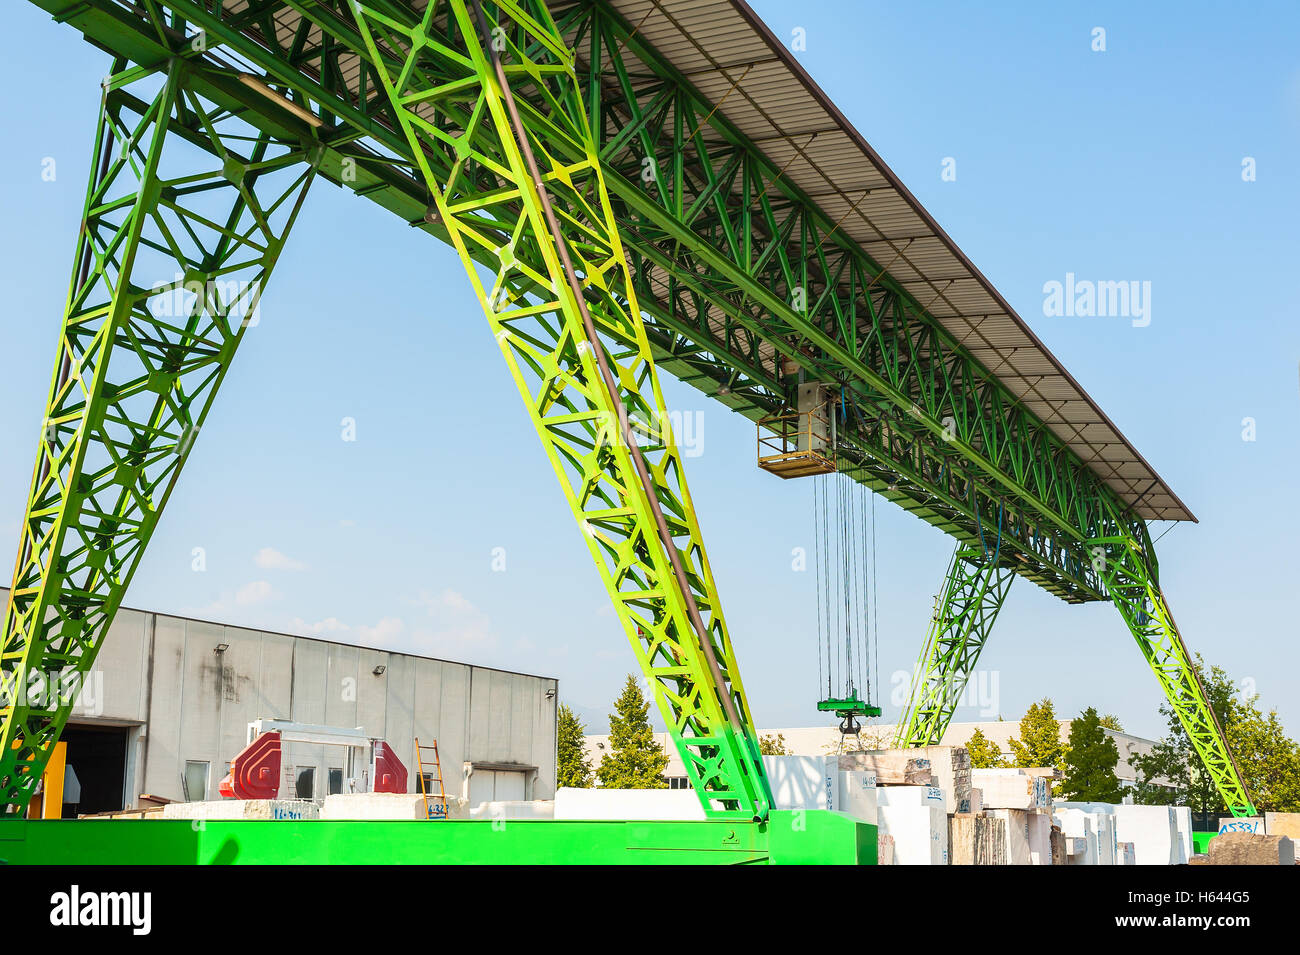 Green gantry crane at work in a warehouse of marble blocks Stock Photo